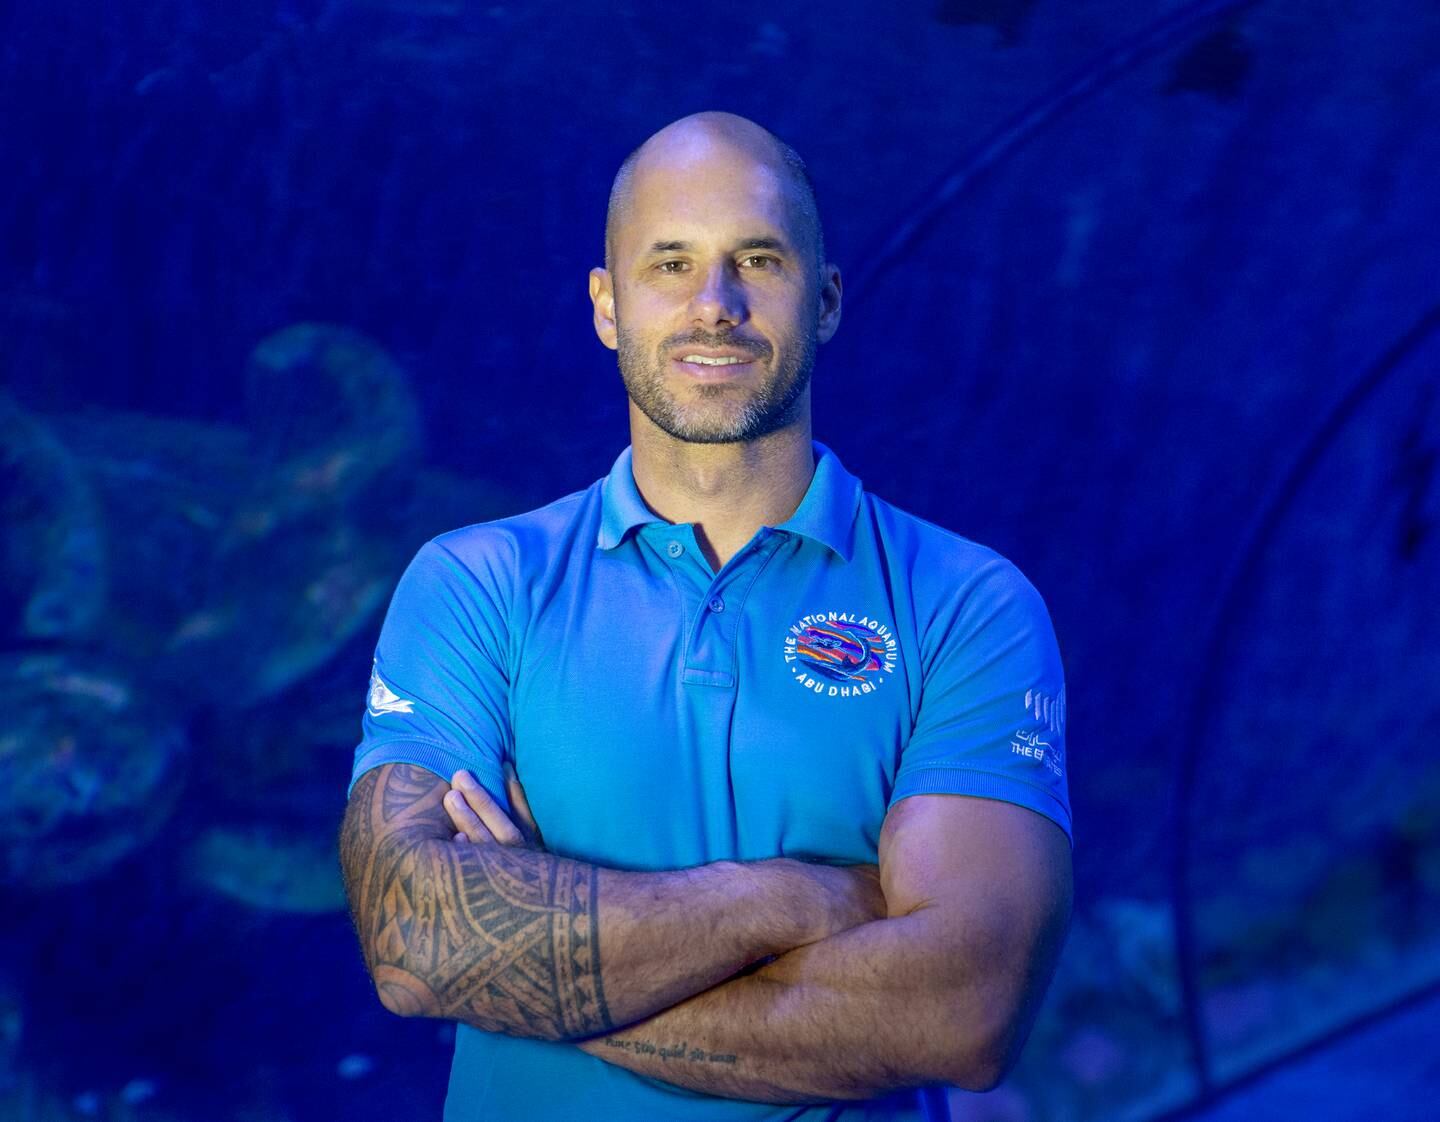 Paul Hamilton is the general manager and project manager of The National Aquarium Abu Dhabi